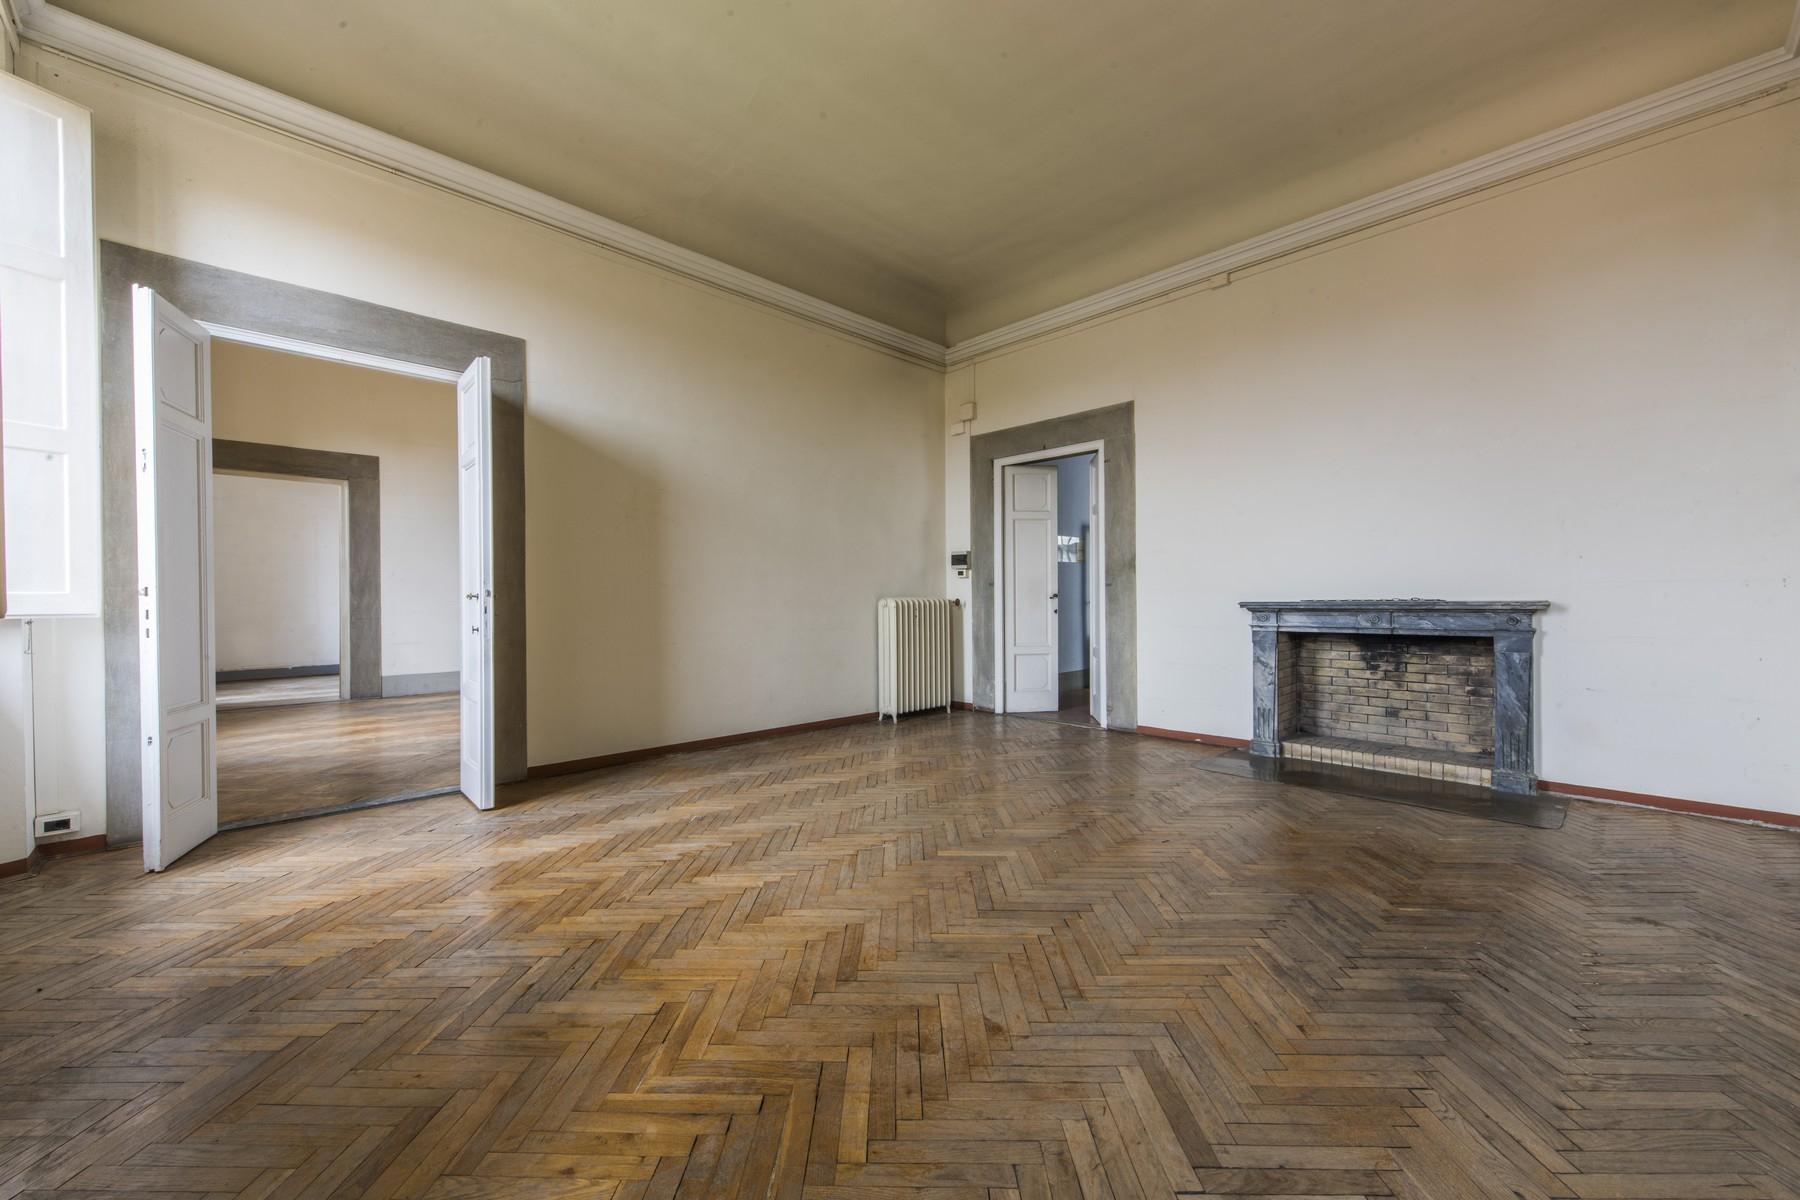 Magnificent 520sqm penthouse in a historic palazzo. - 5